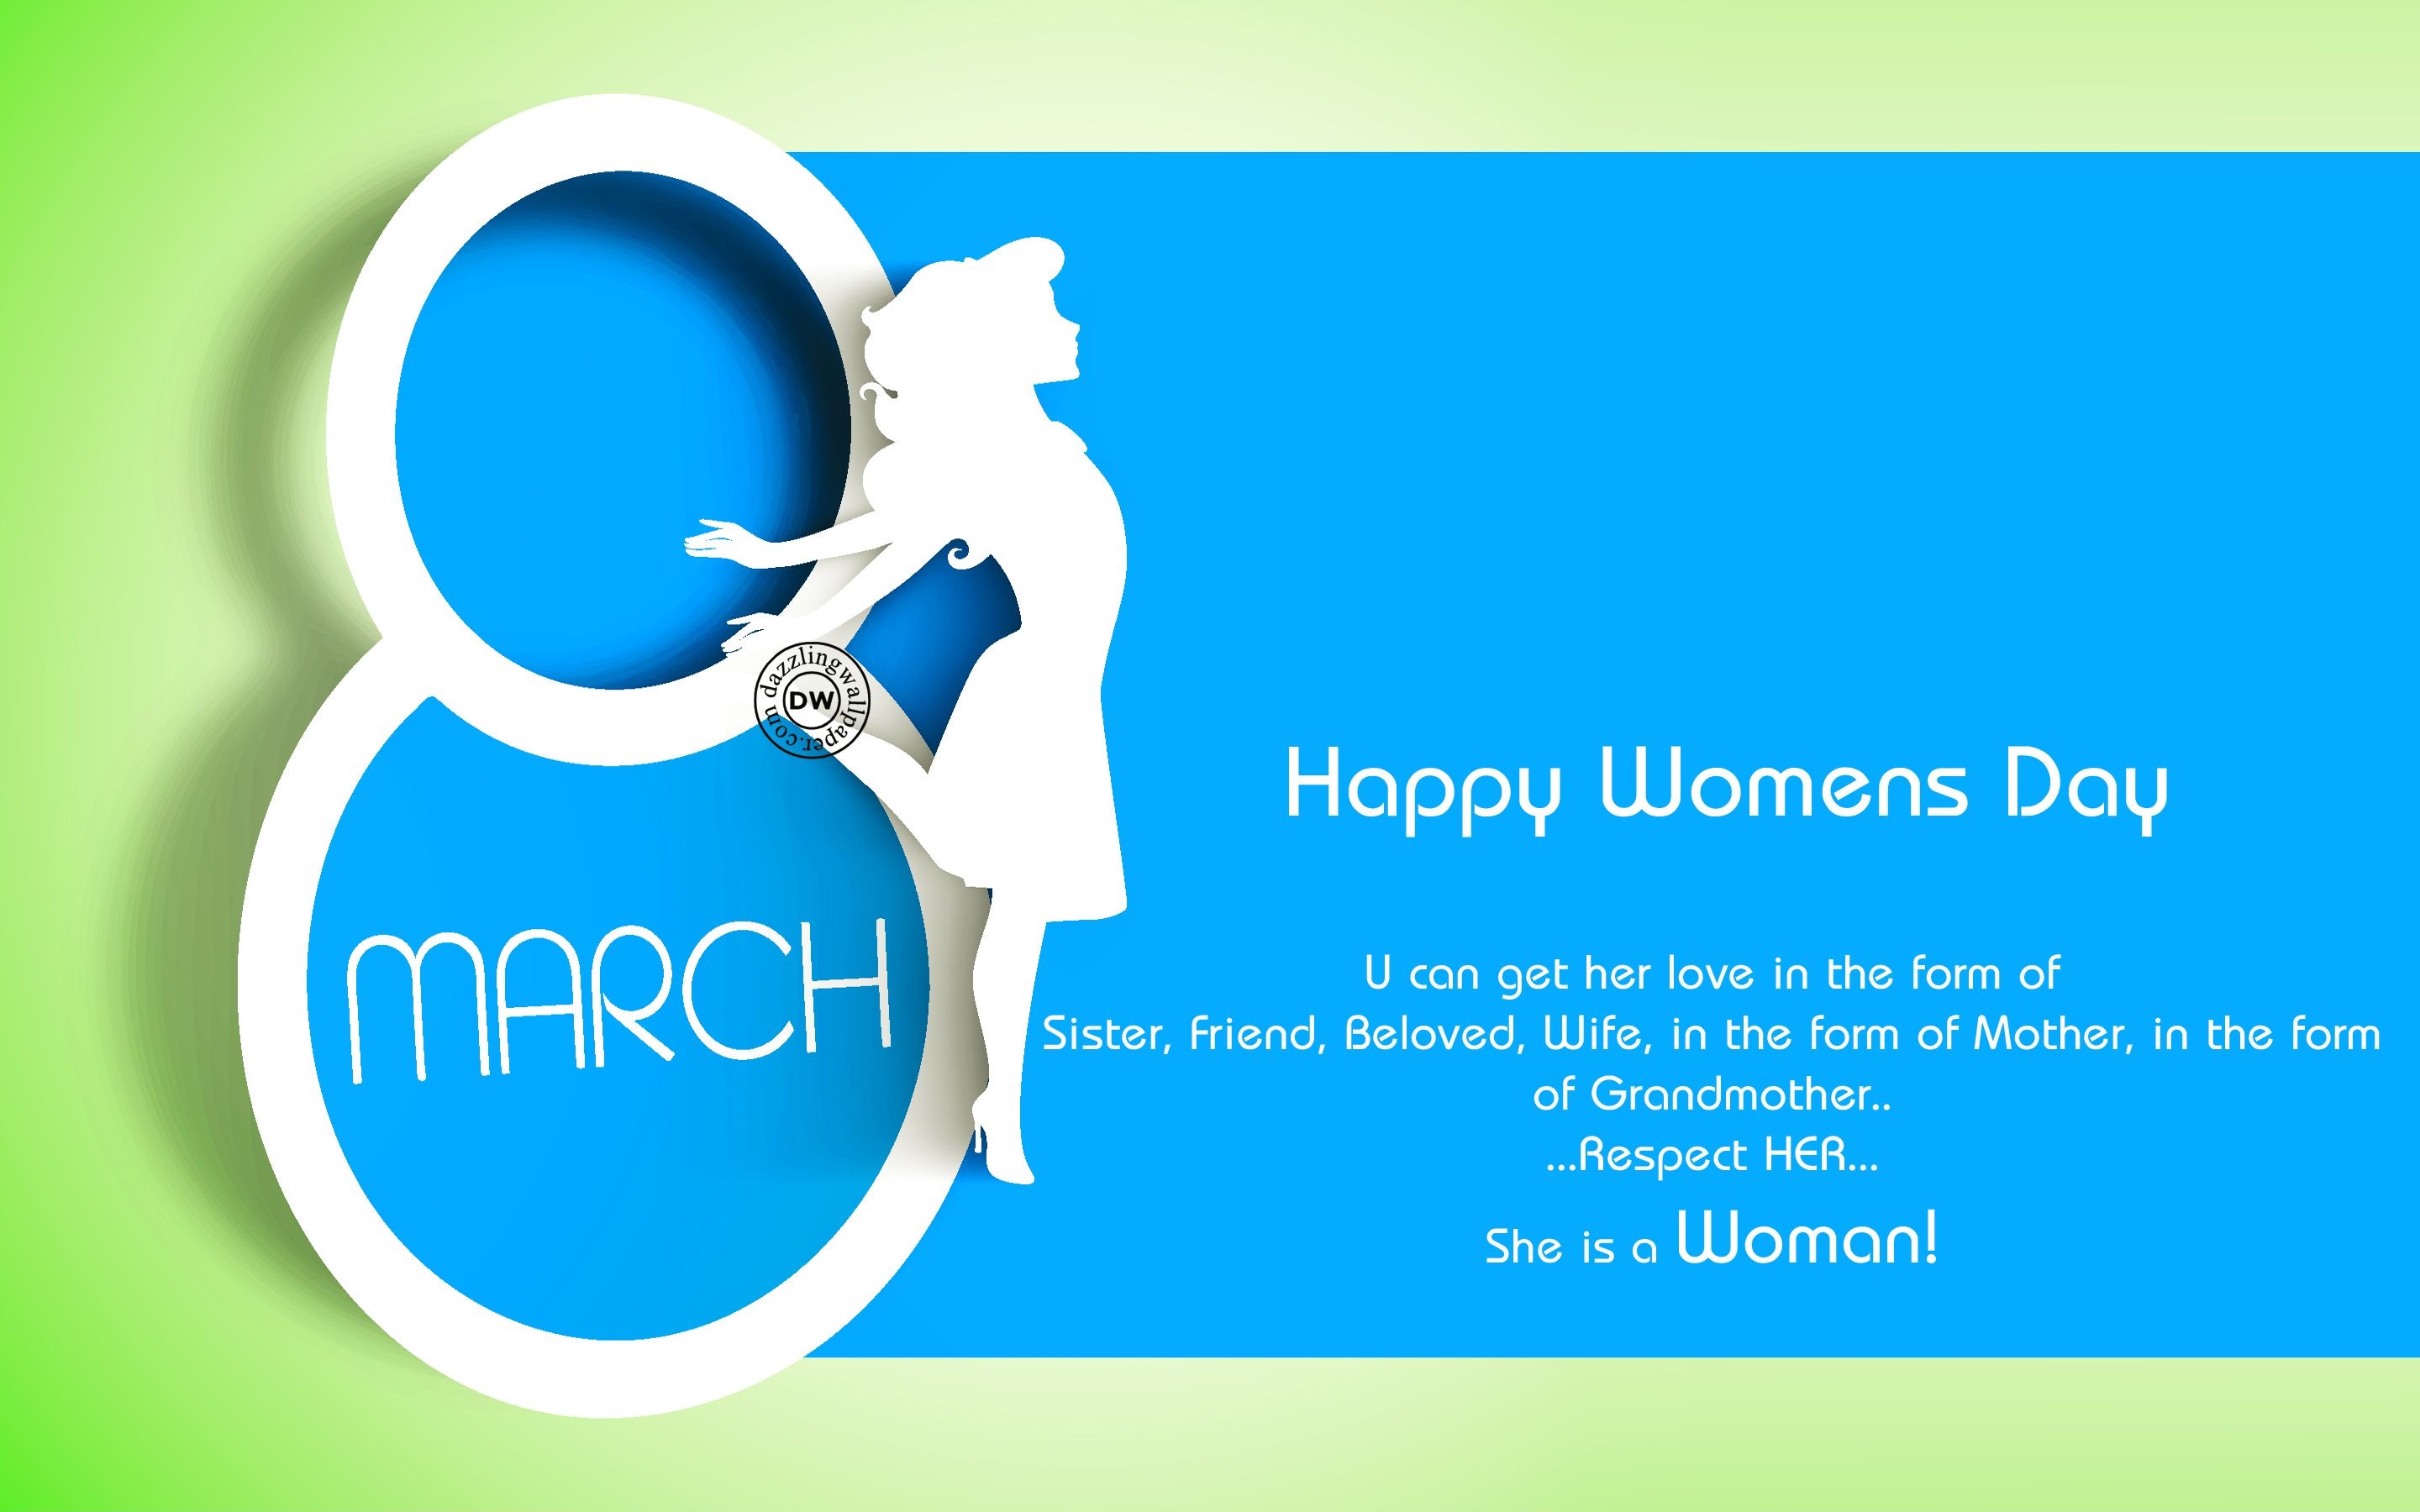 Happy Women's Day 2016 sms wishes quotes greetings (7)